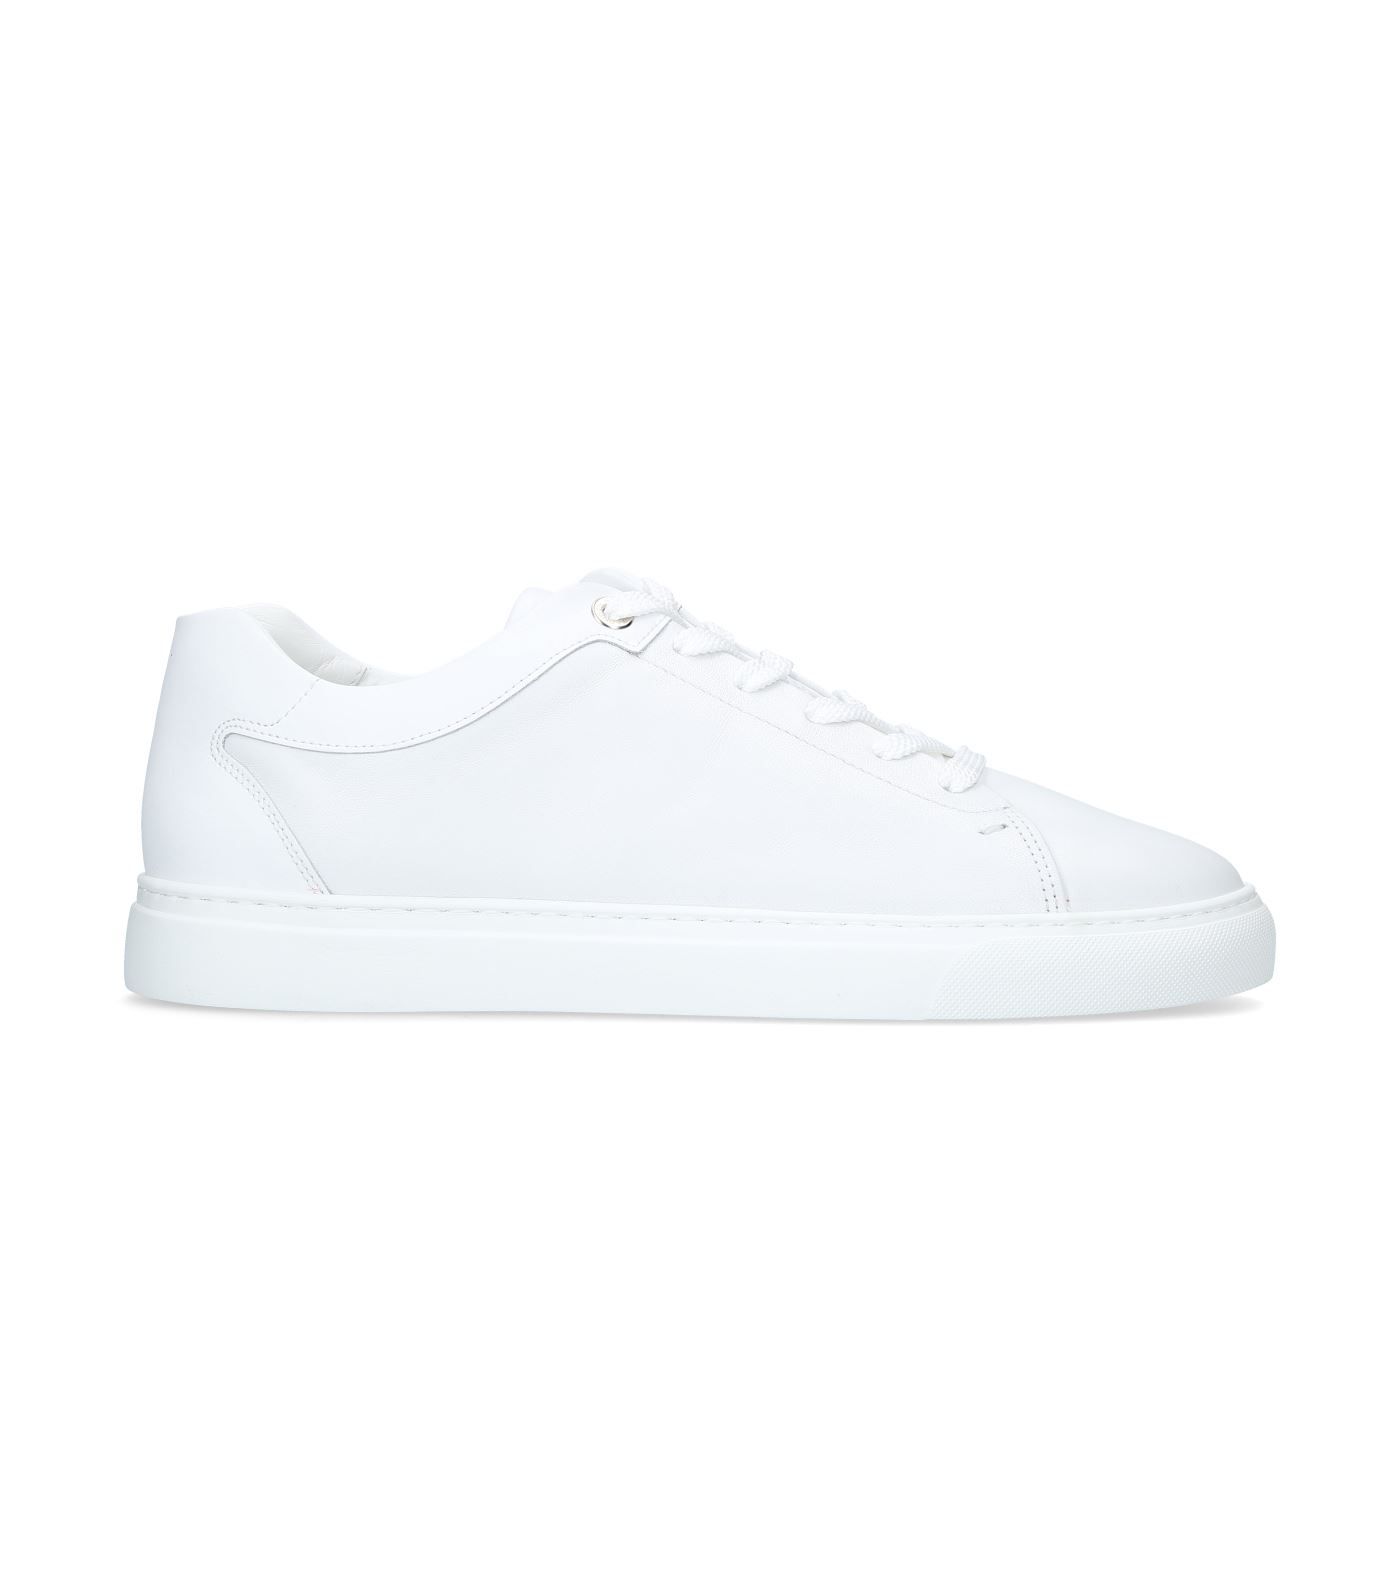 coolest white trainers 2019